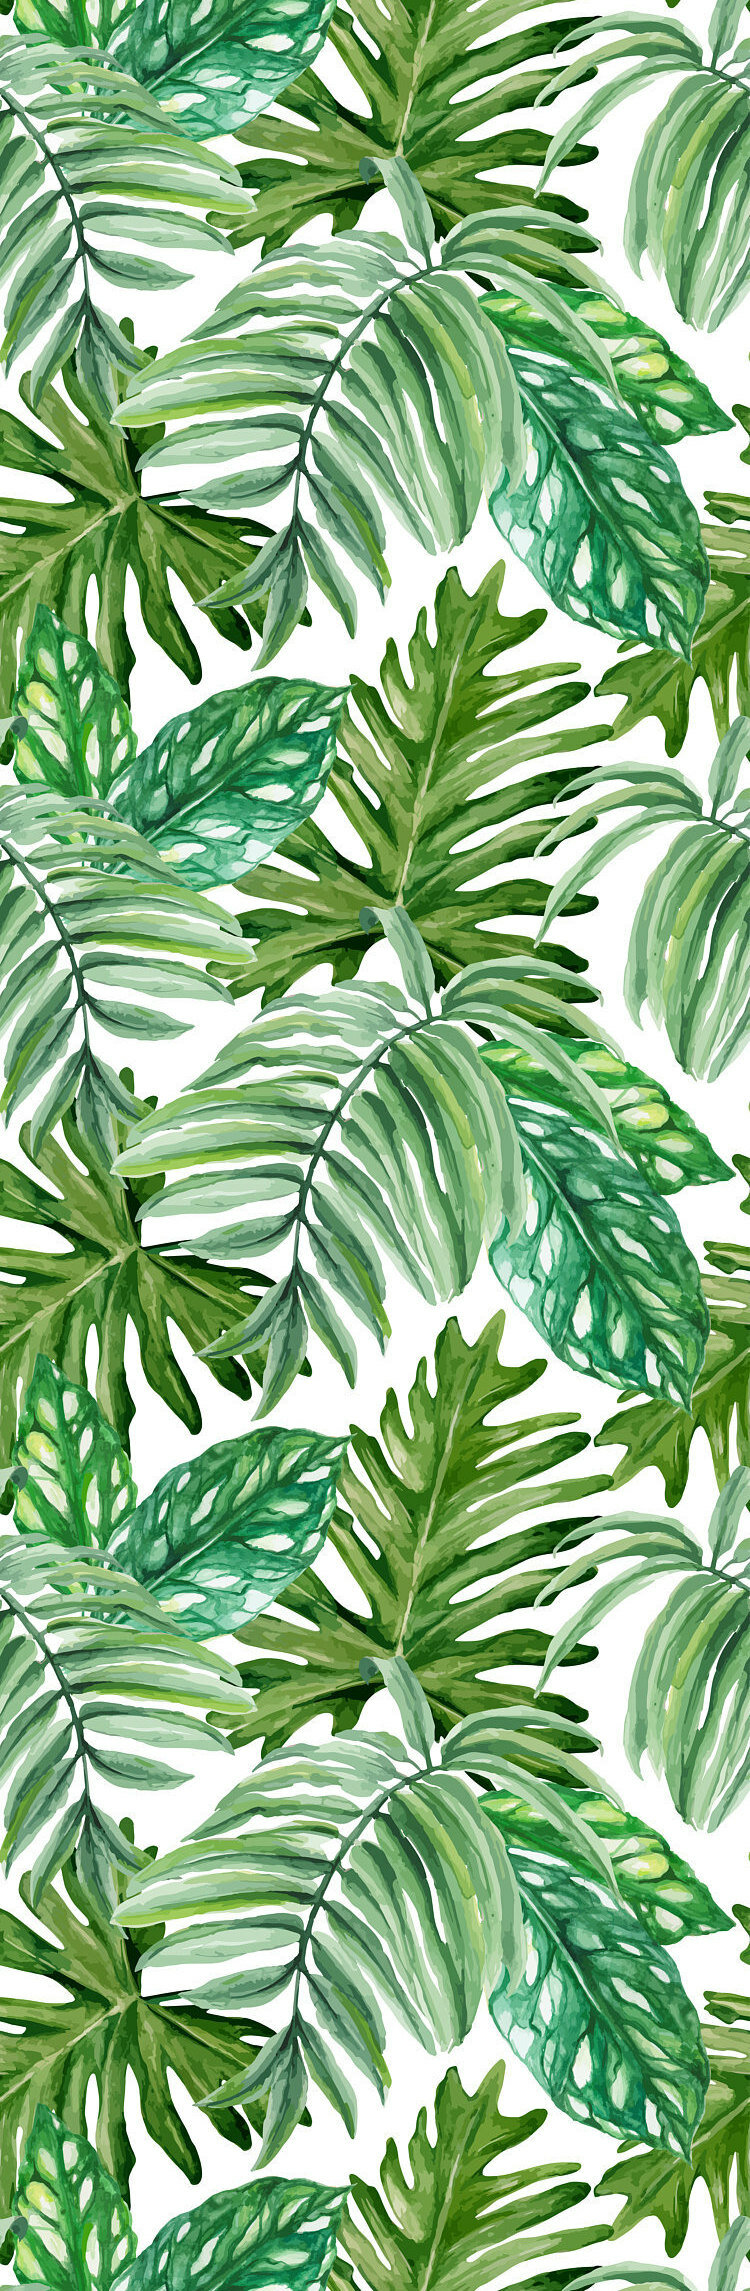 Bay Isle Home Wilkinson Removable Exotic Monstera Leaves